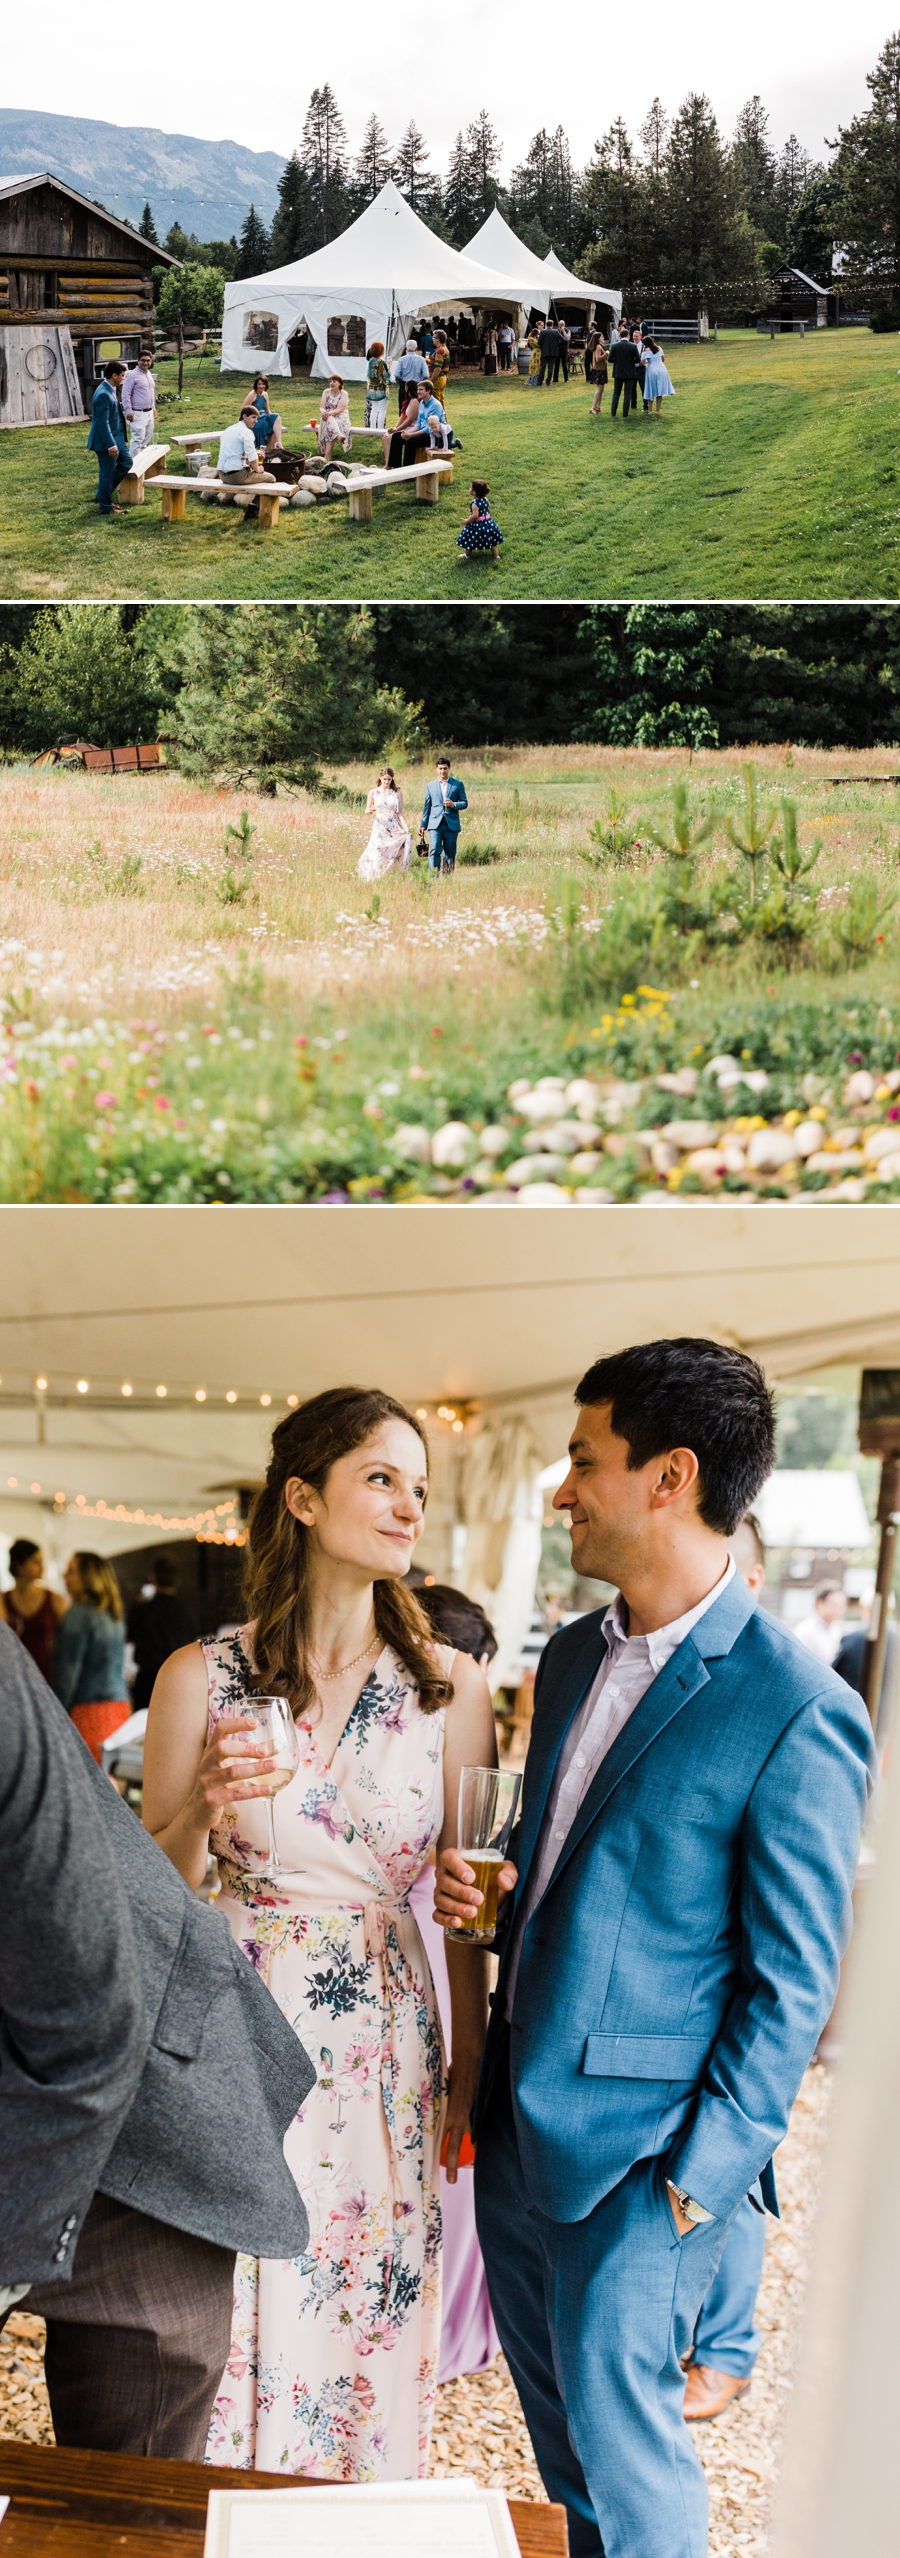 Rustic Mountain Wedding in Leavenworth at Brown Family Homestead photographed by Seattle Wedding Photographer Amy Galbraith